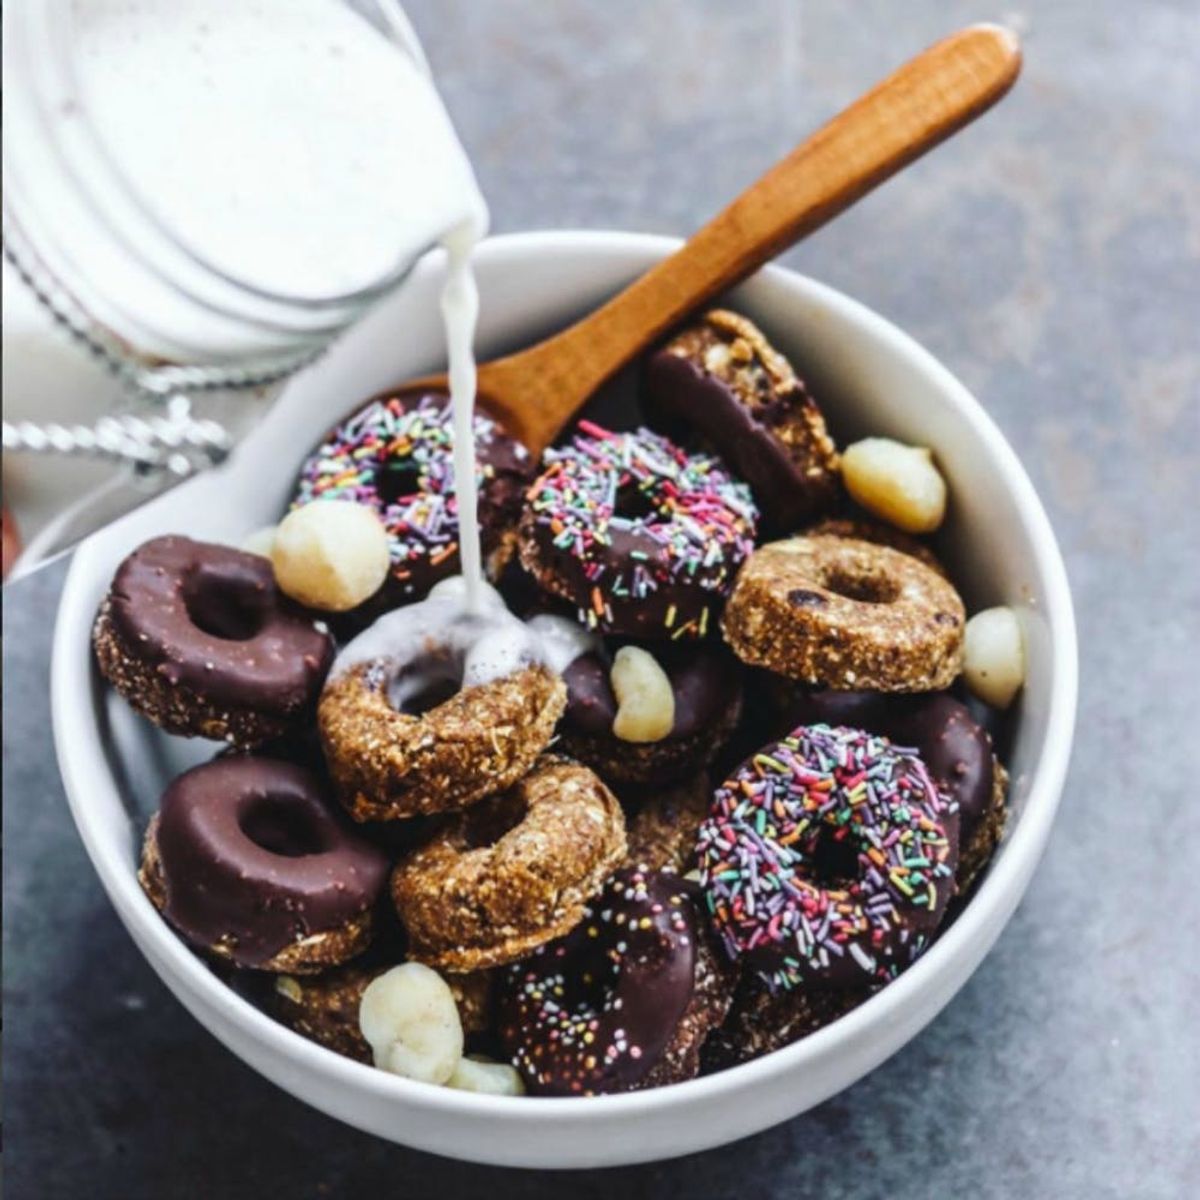 What These Vegan Instagrammers Are Doing to Donuts Will Blow Your Mind